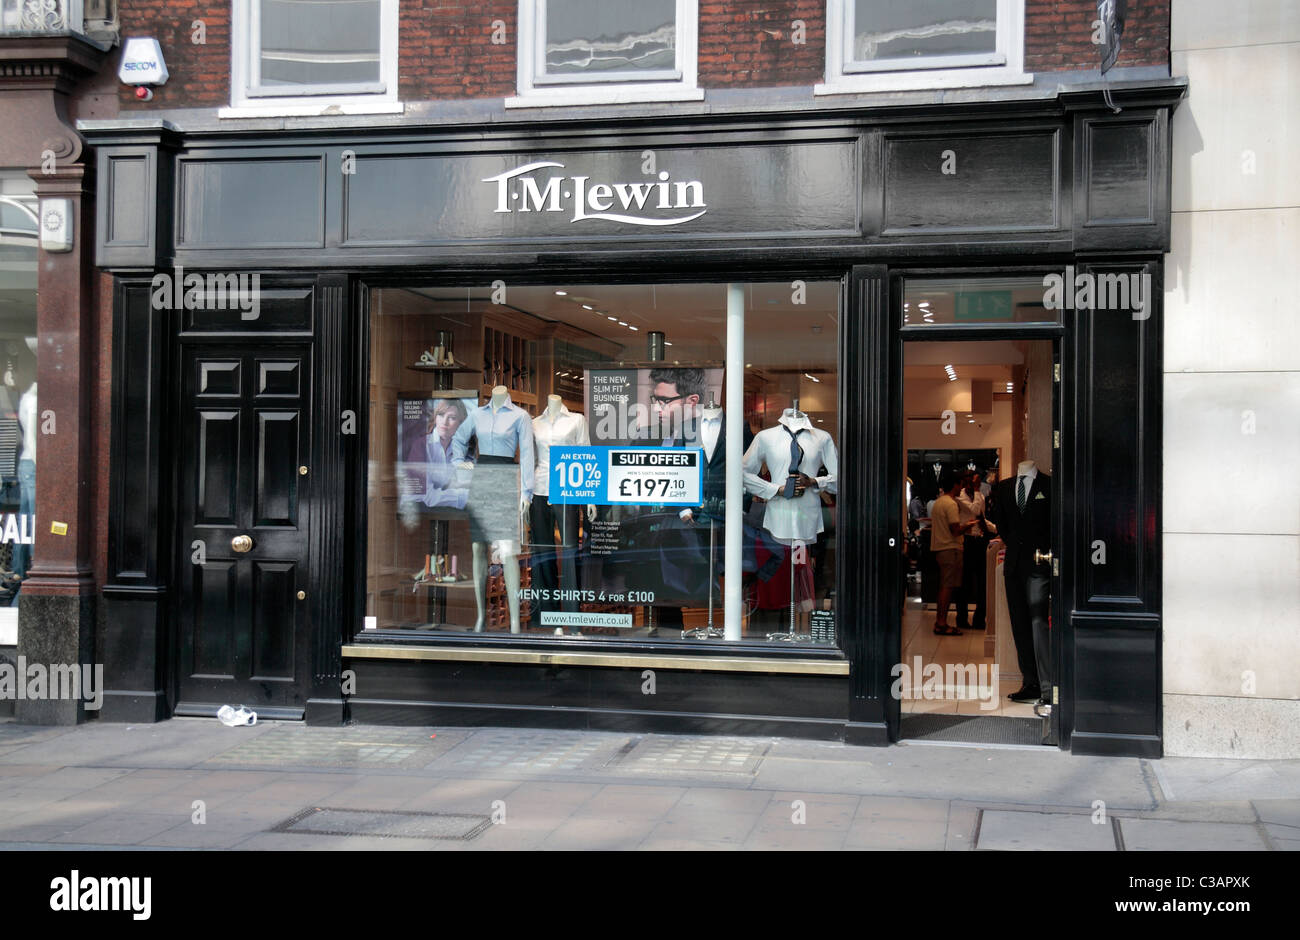 The shop front and entrance to the T M Lewin shirtmaker's and outfitters on New Bond Street, London. Apr 2011 Stock Photo